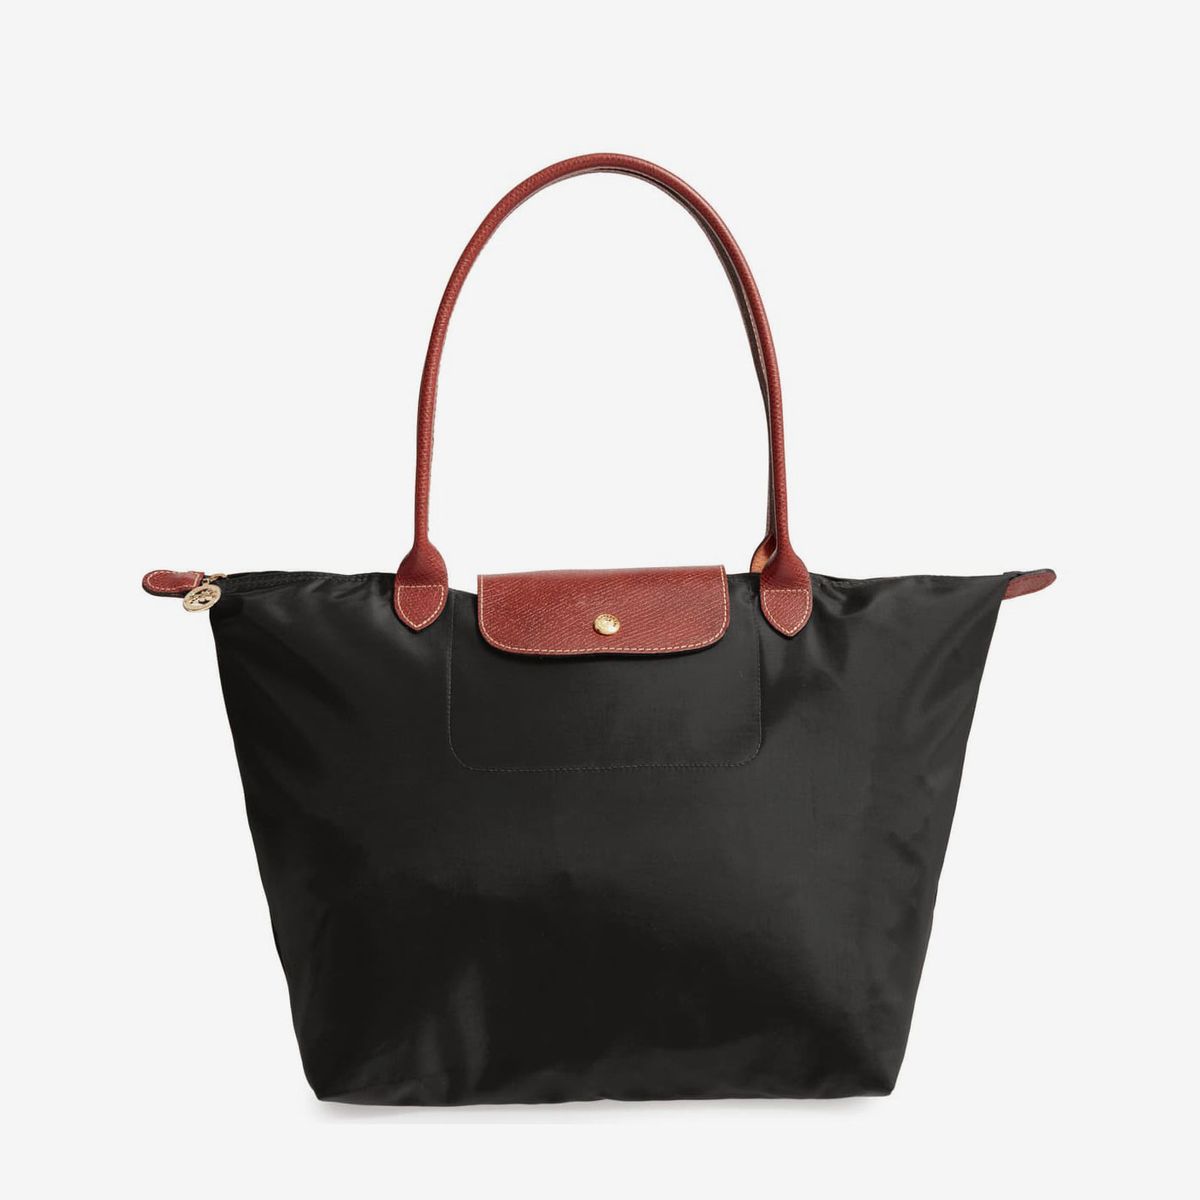 Practical tote bag for women